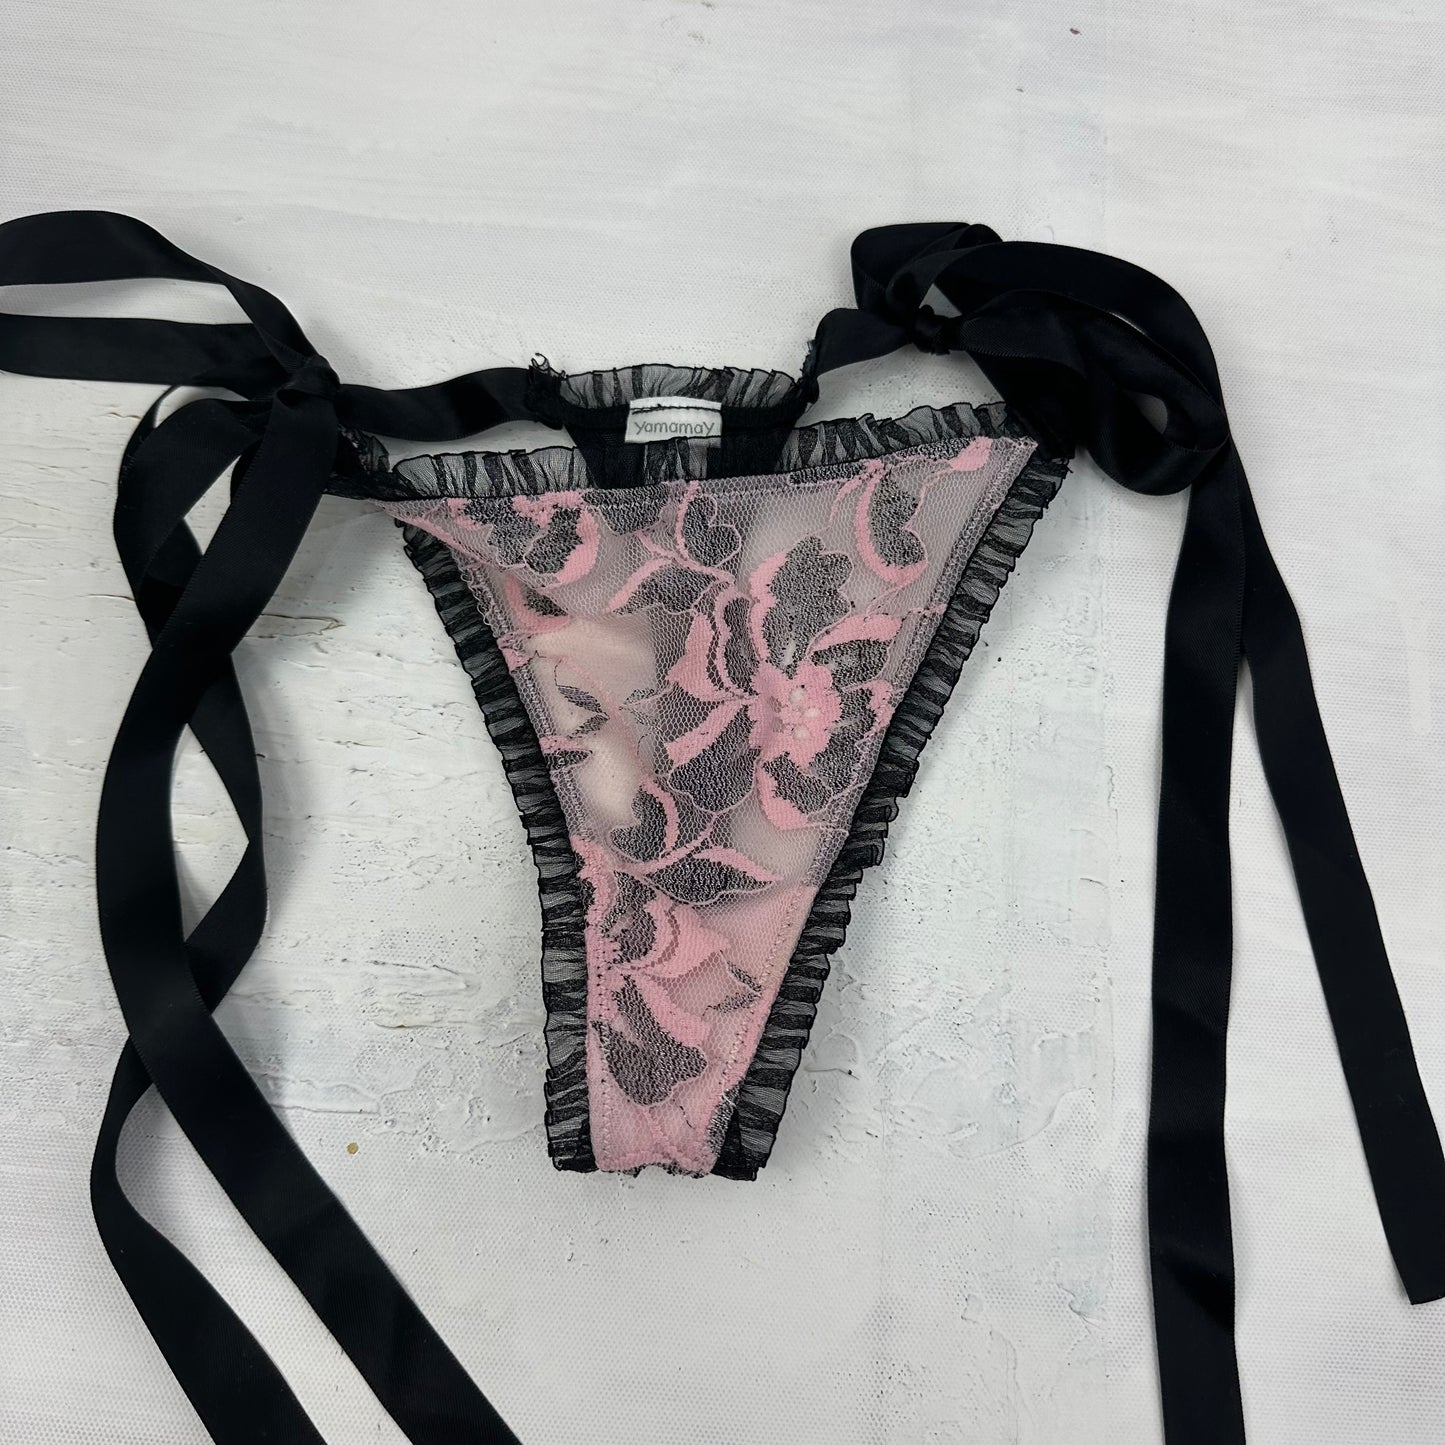 ADDISON RAE DROP | small black and pink lace underwear with bow side ties